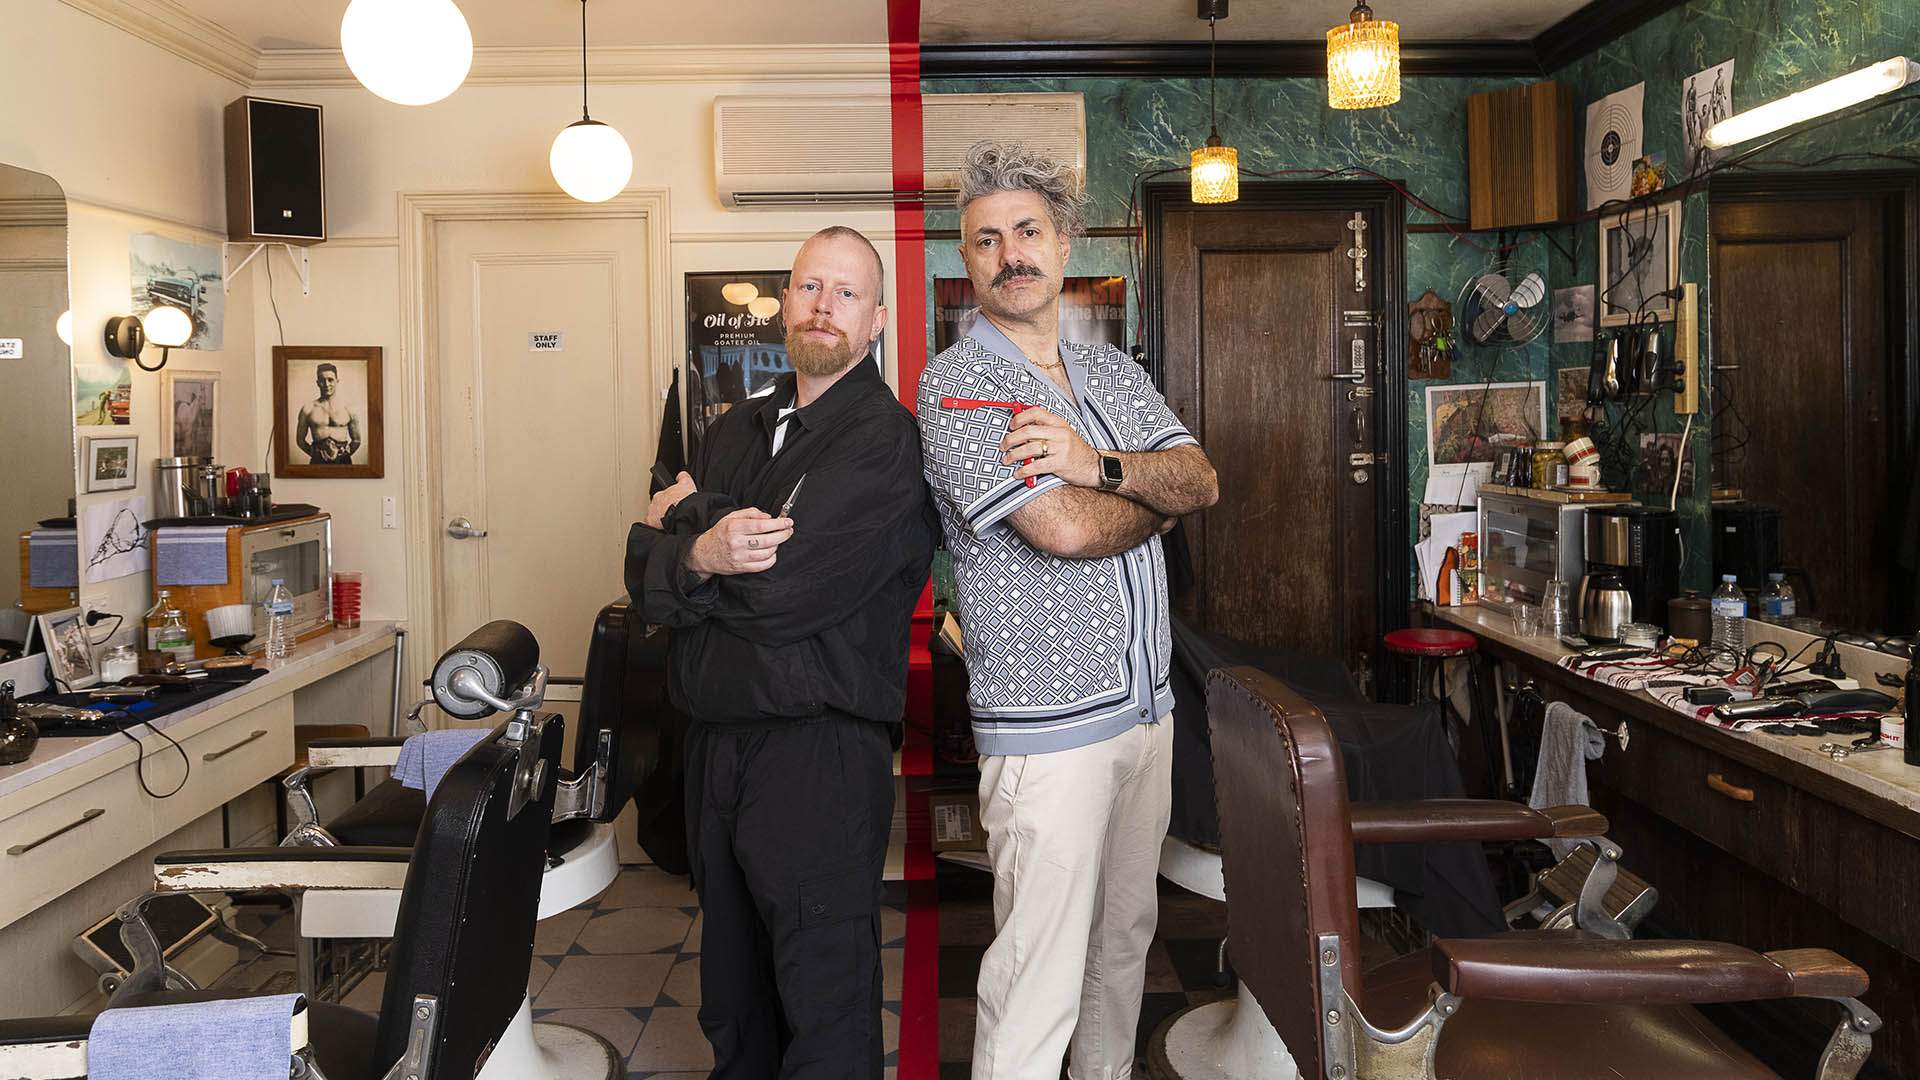 This Pop-Up Barber Is Giving Melburnians Free Ryan Gosling-Style Goatees and Chris Evans Moustaches